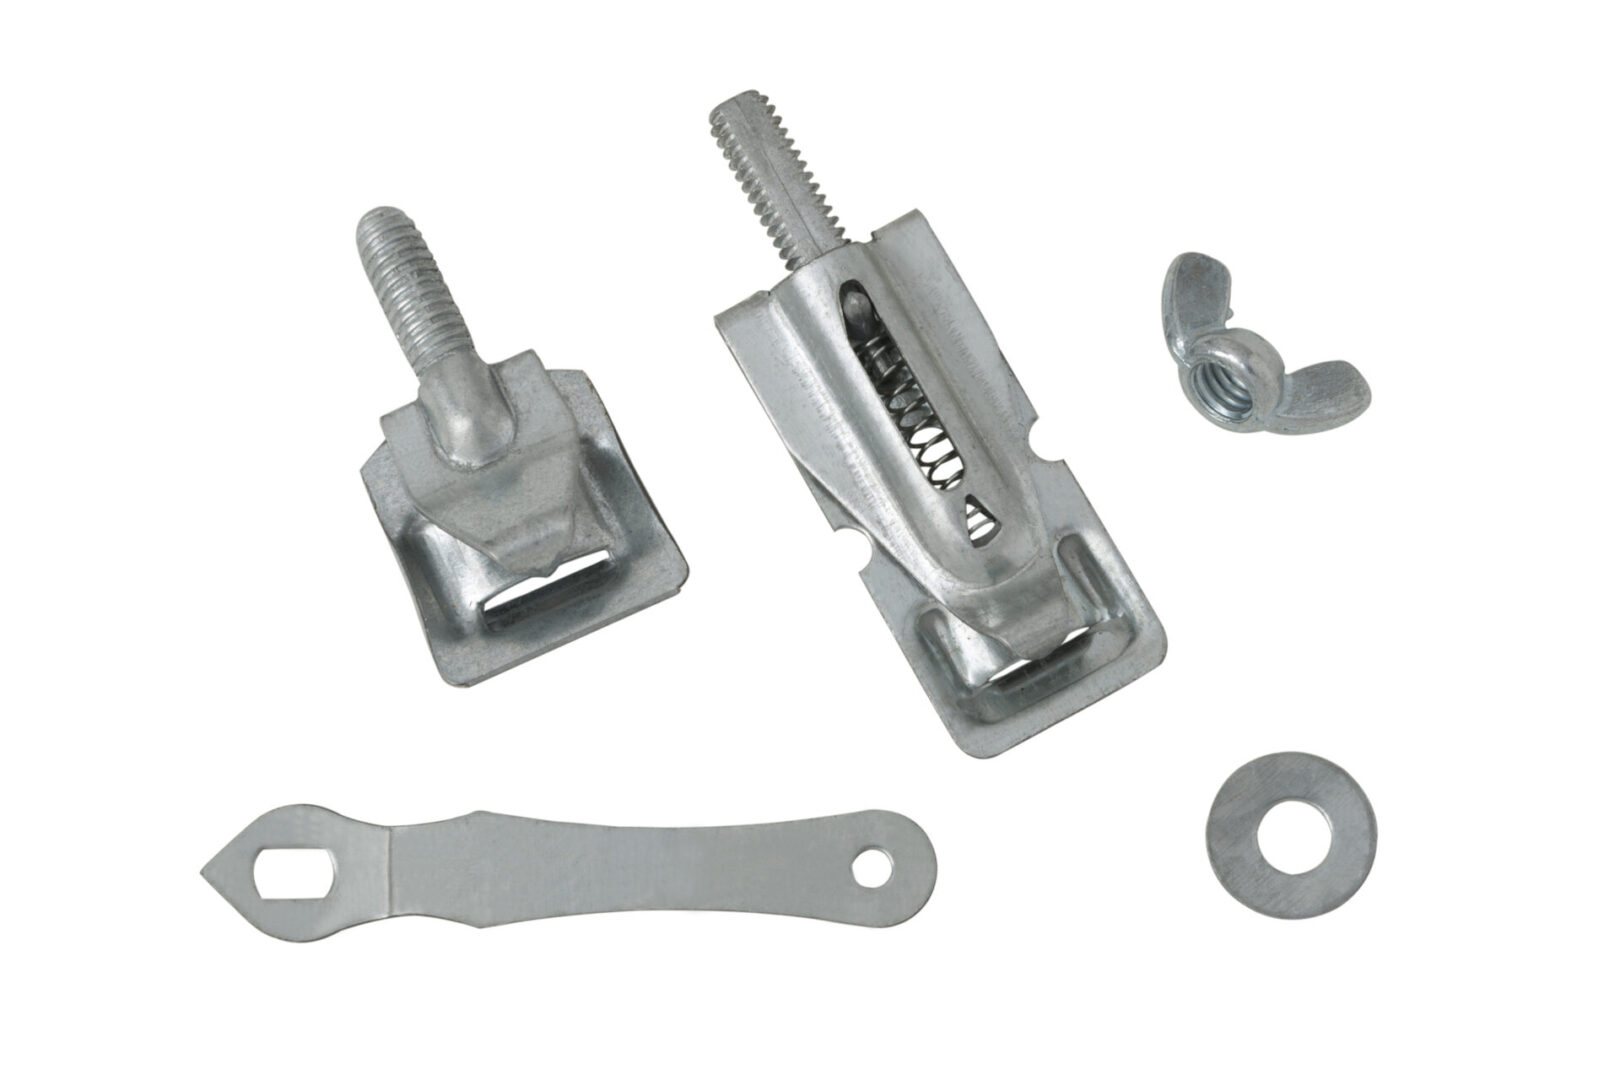 Assorted metal hardware pieces including wing nuts, bolts, washers, and a steel bracket isolated on a white background.